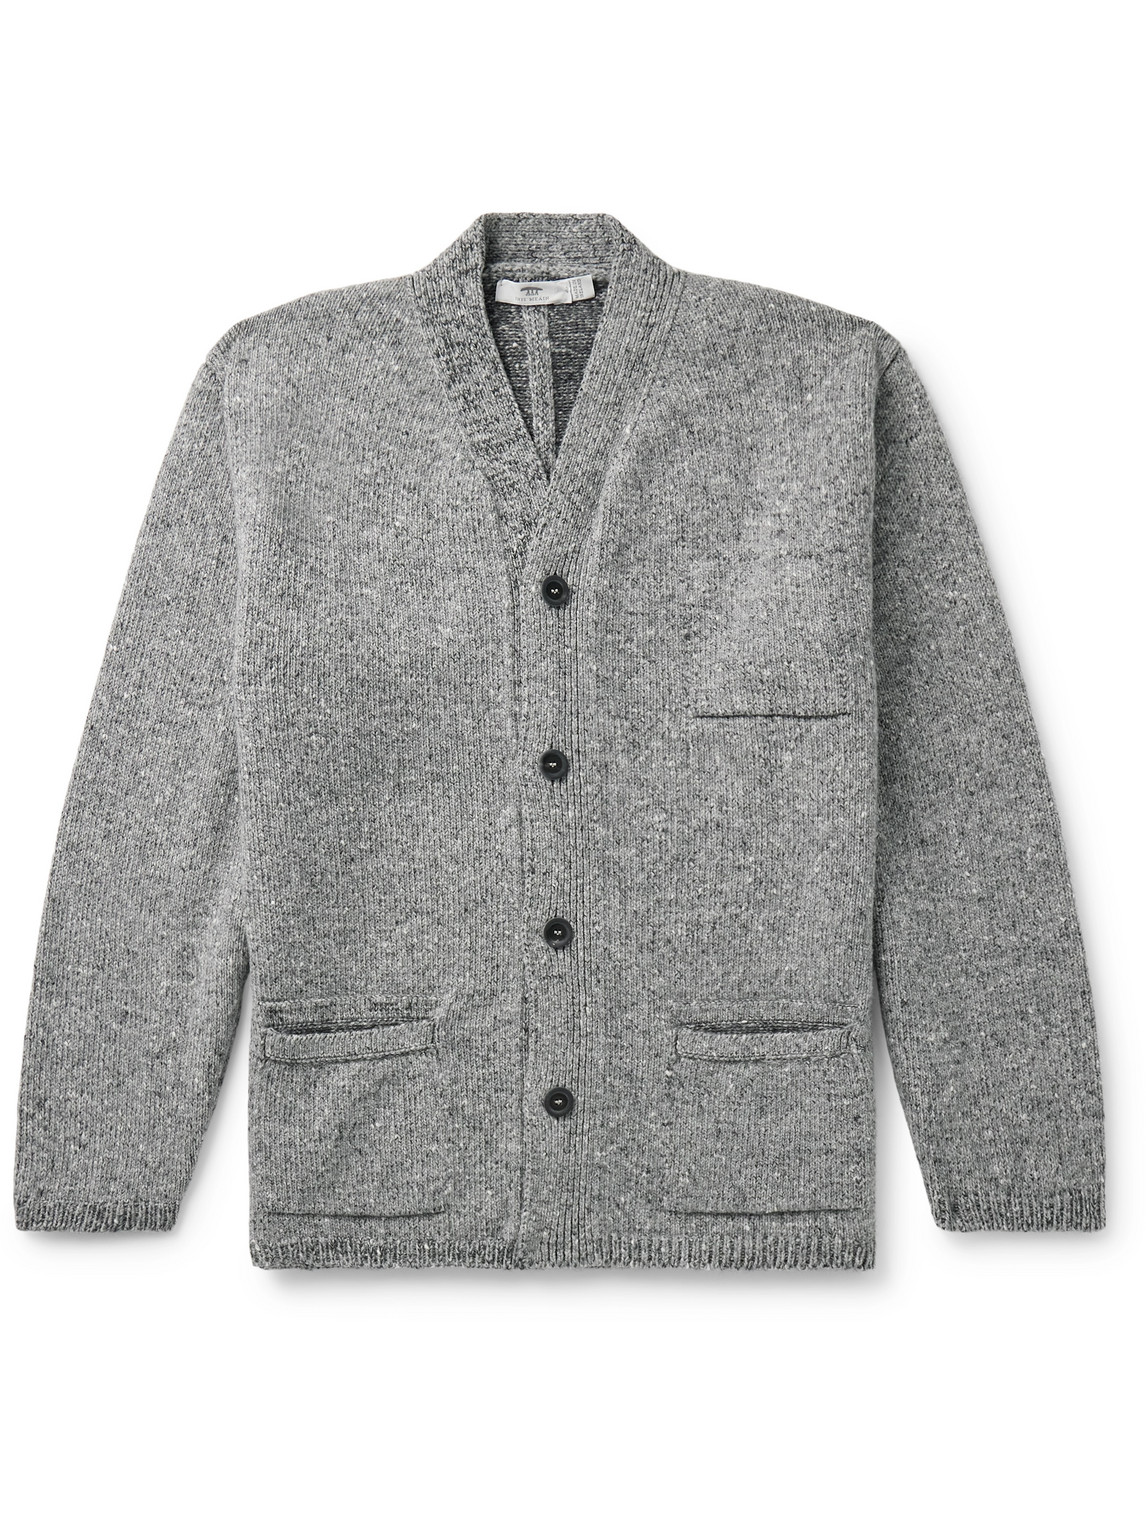 Inis Meáin Oversized Donegal Merino Wool and Cashmere-Blend Cardigan